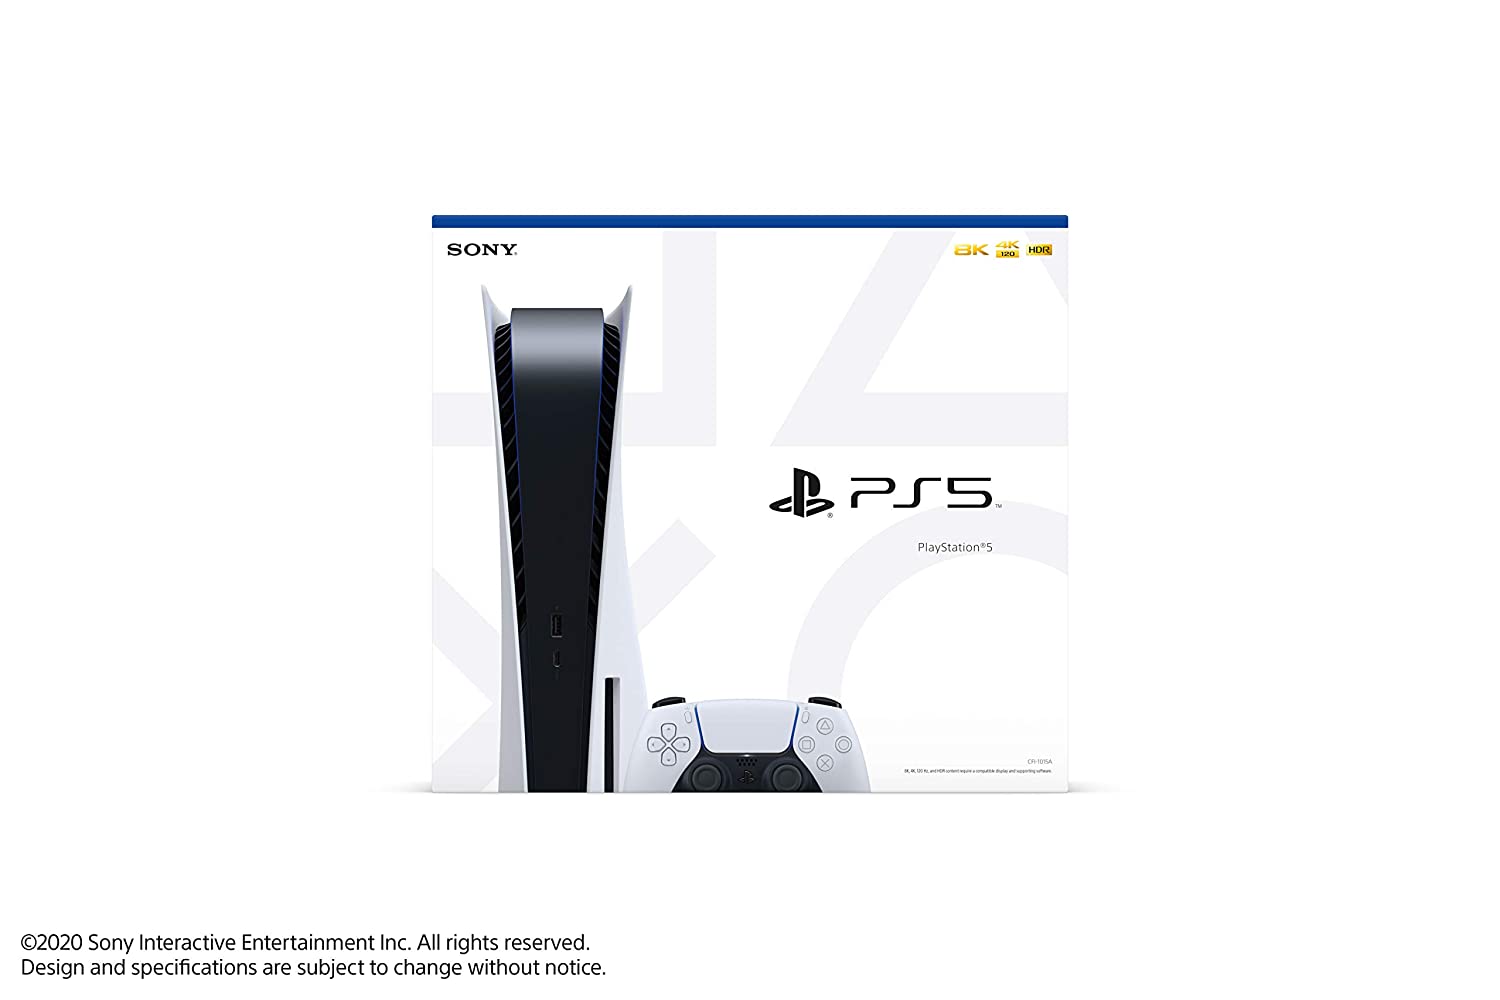 Sony Playstation 5 Disc Version with Extra DualSense Wireless Controller - Pro-Distributing